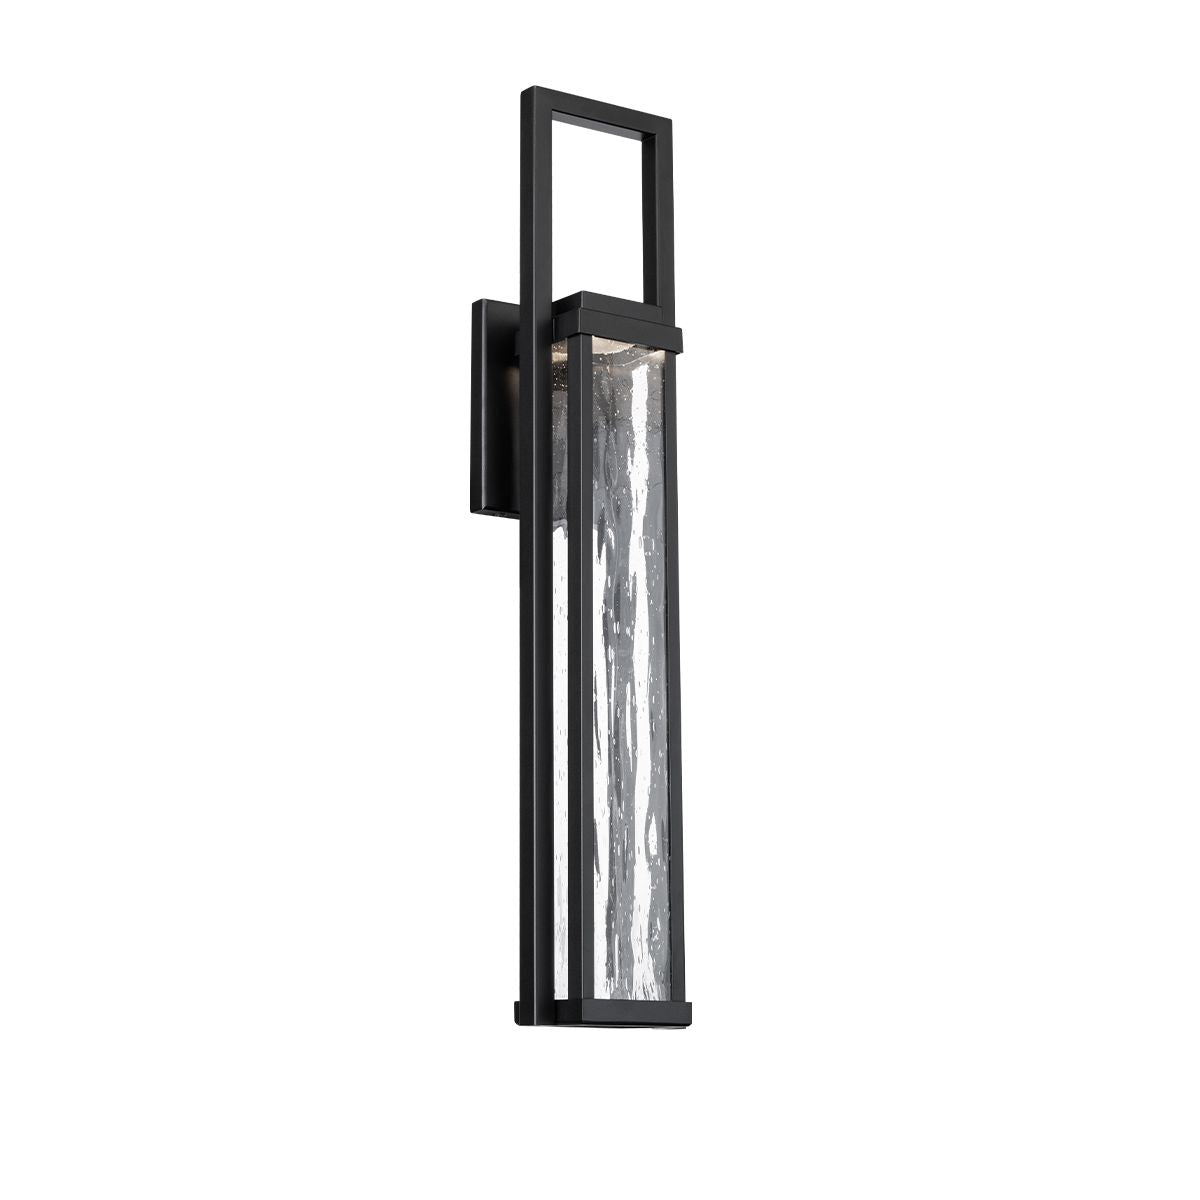 Revere 25 In. LED Outdoor Wall Sconce Black Finish